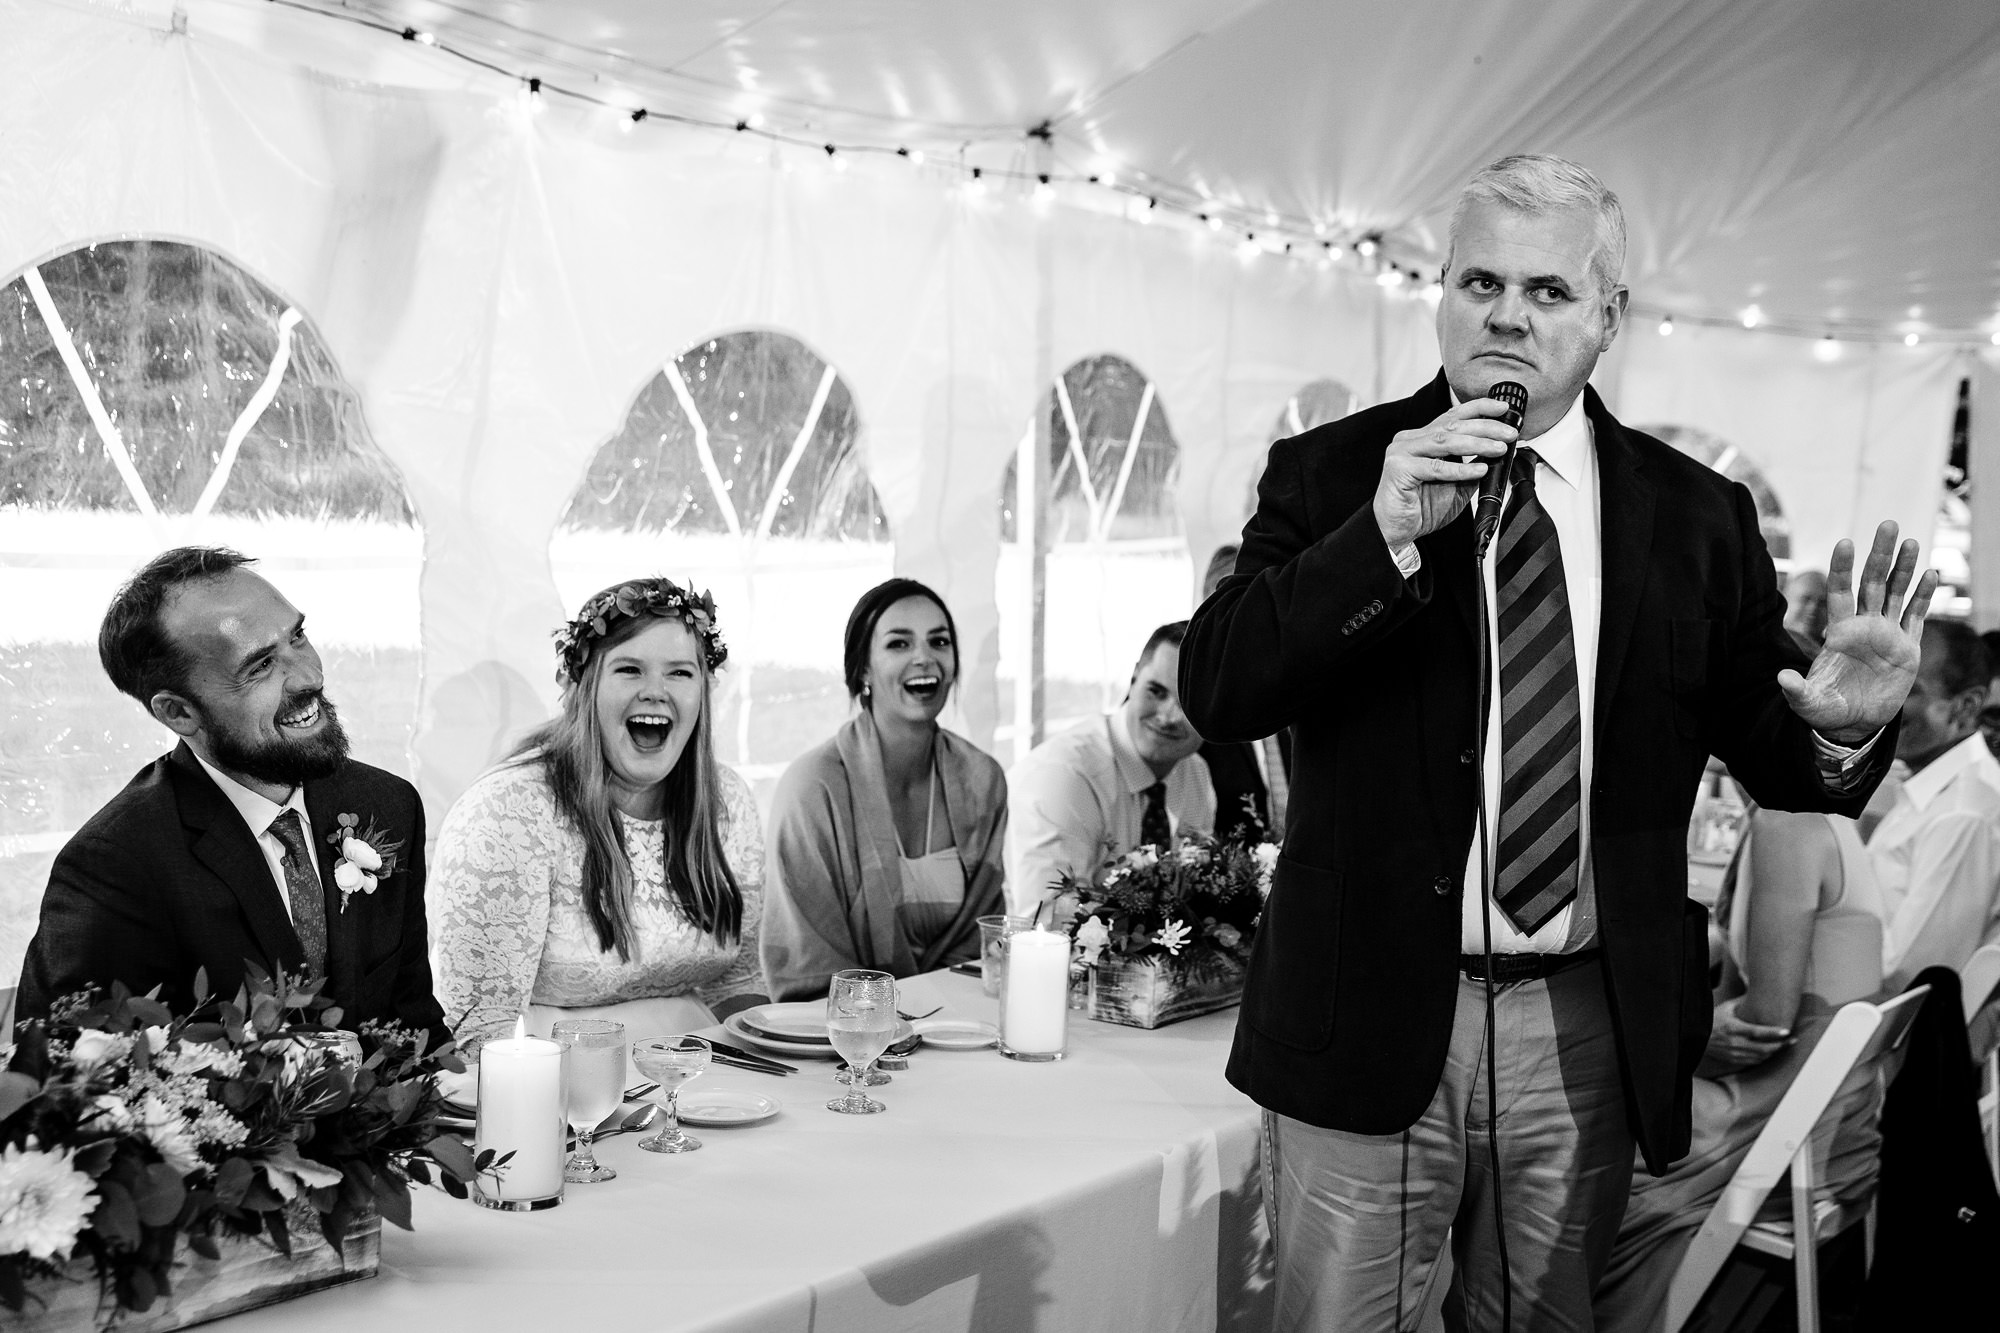 The bride and groom listen to emotional toasts during their Sugarloaf Mountain wedding in western Maine.